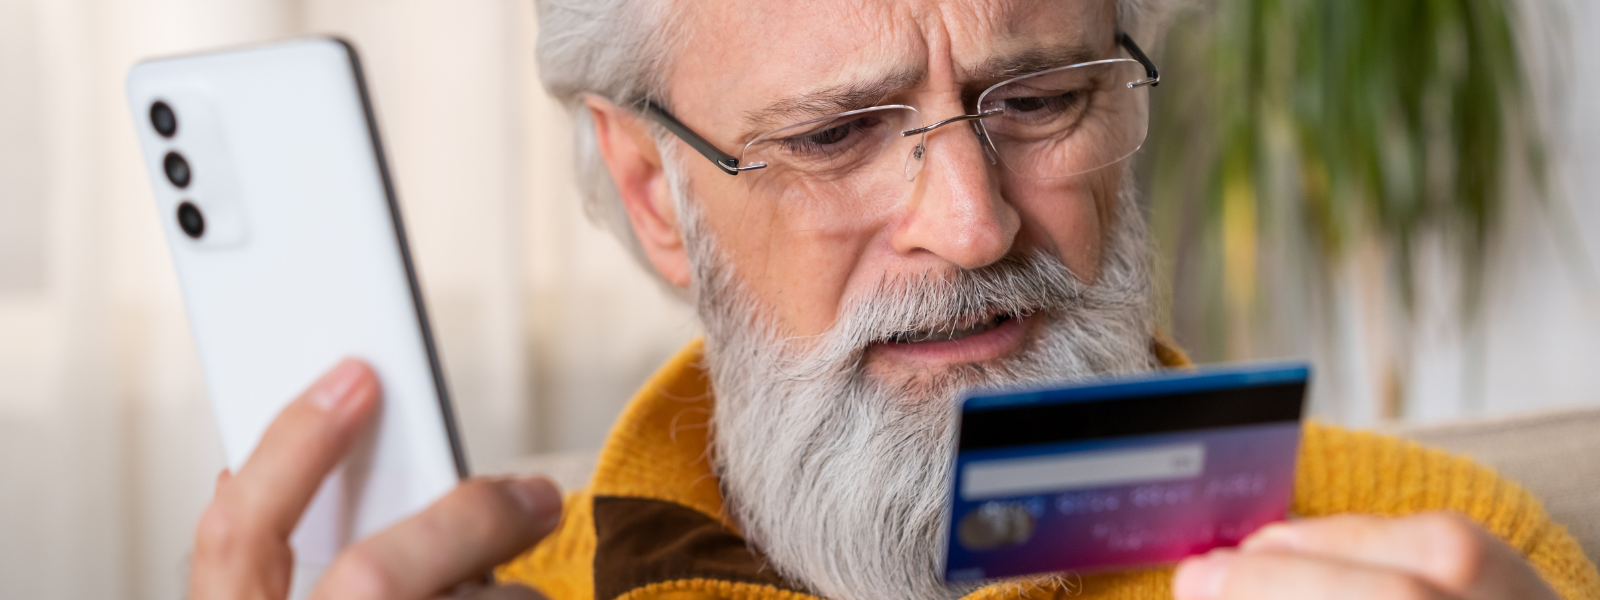 A person holding a credit card and phone.